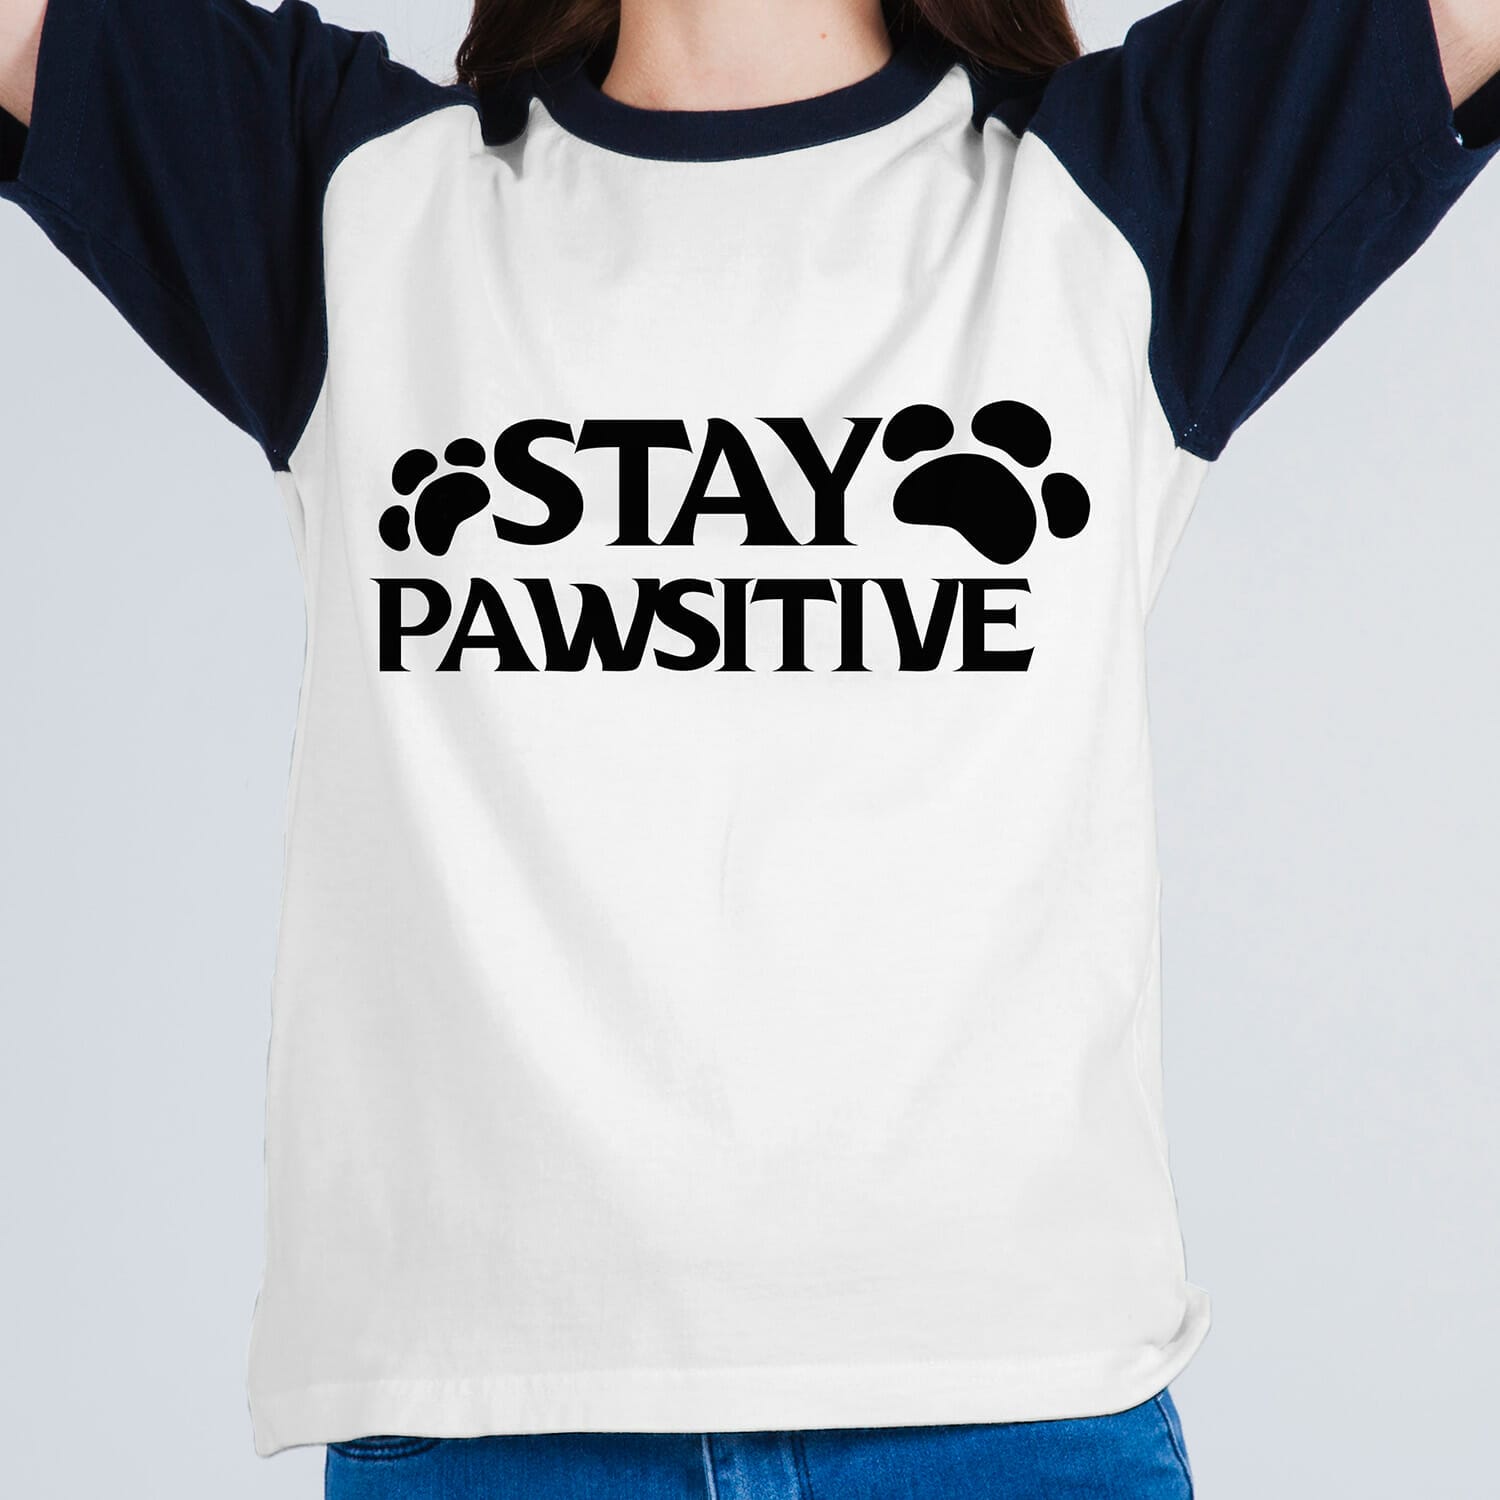 Stay pawsitive Tshirt design For Cat Lovers